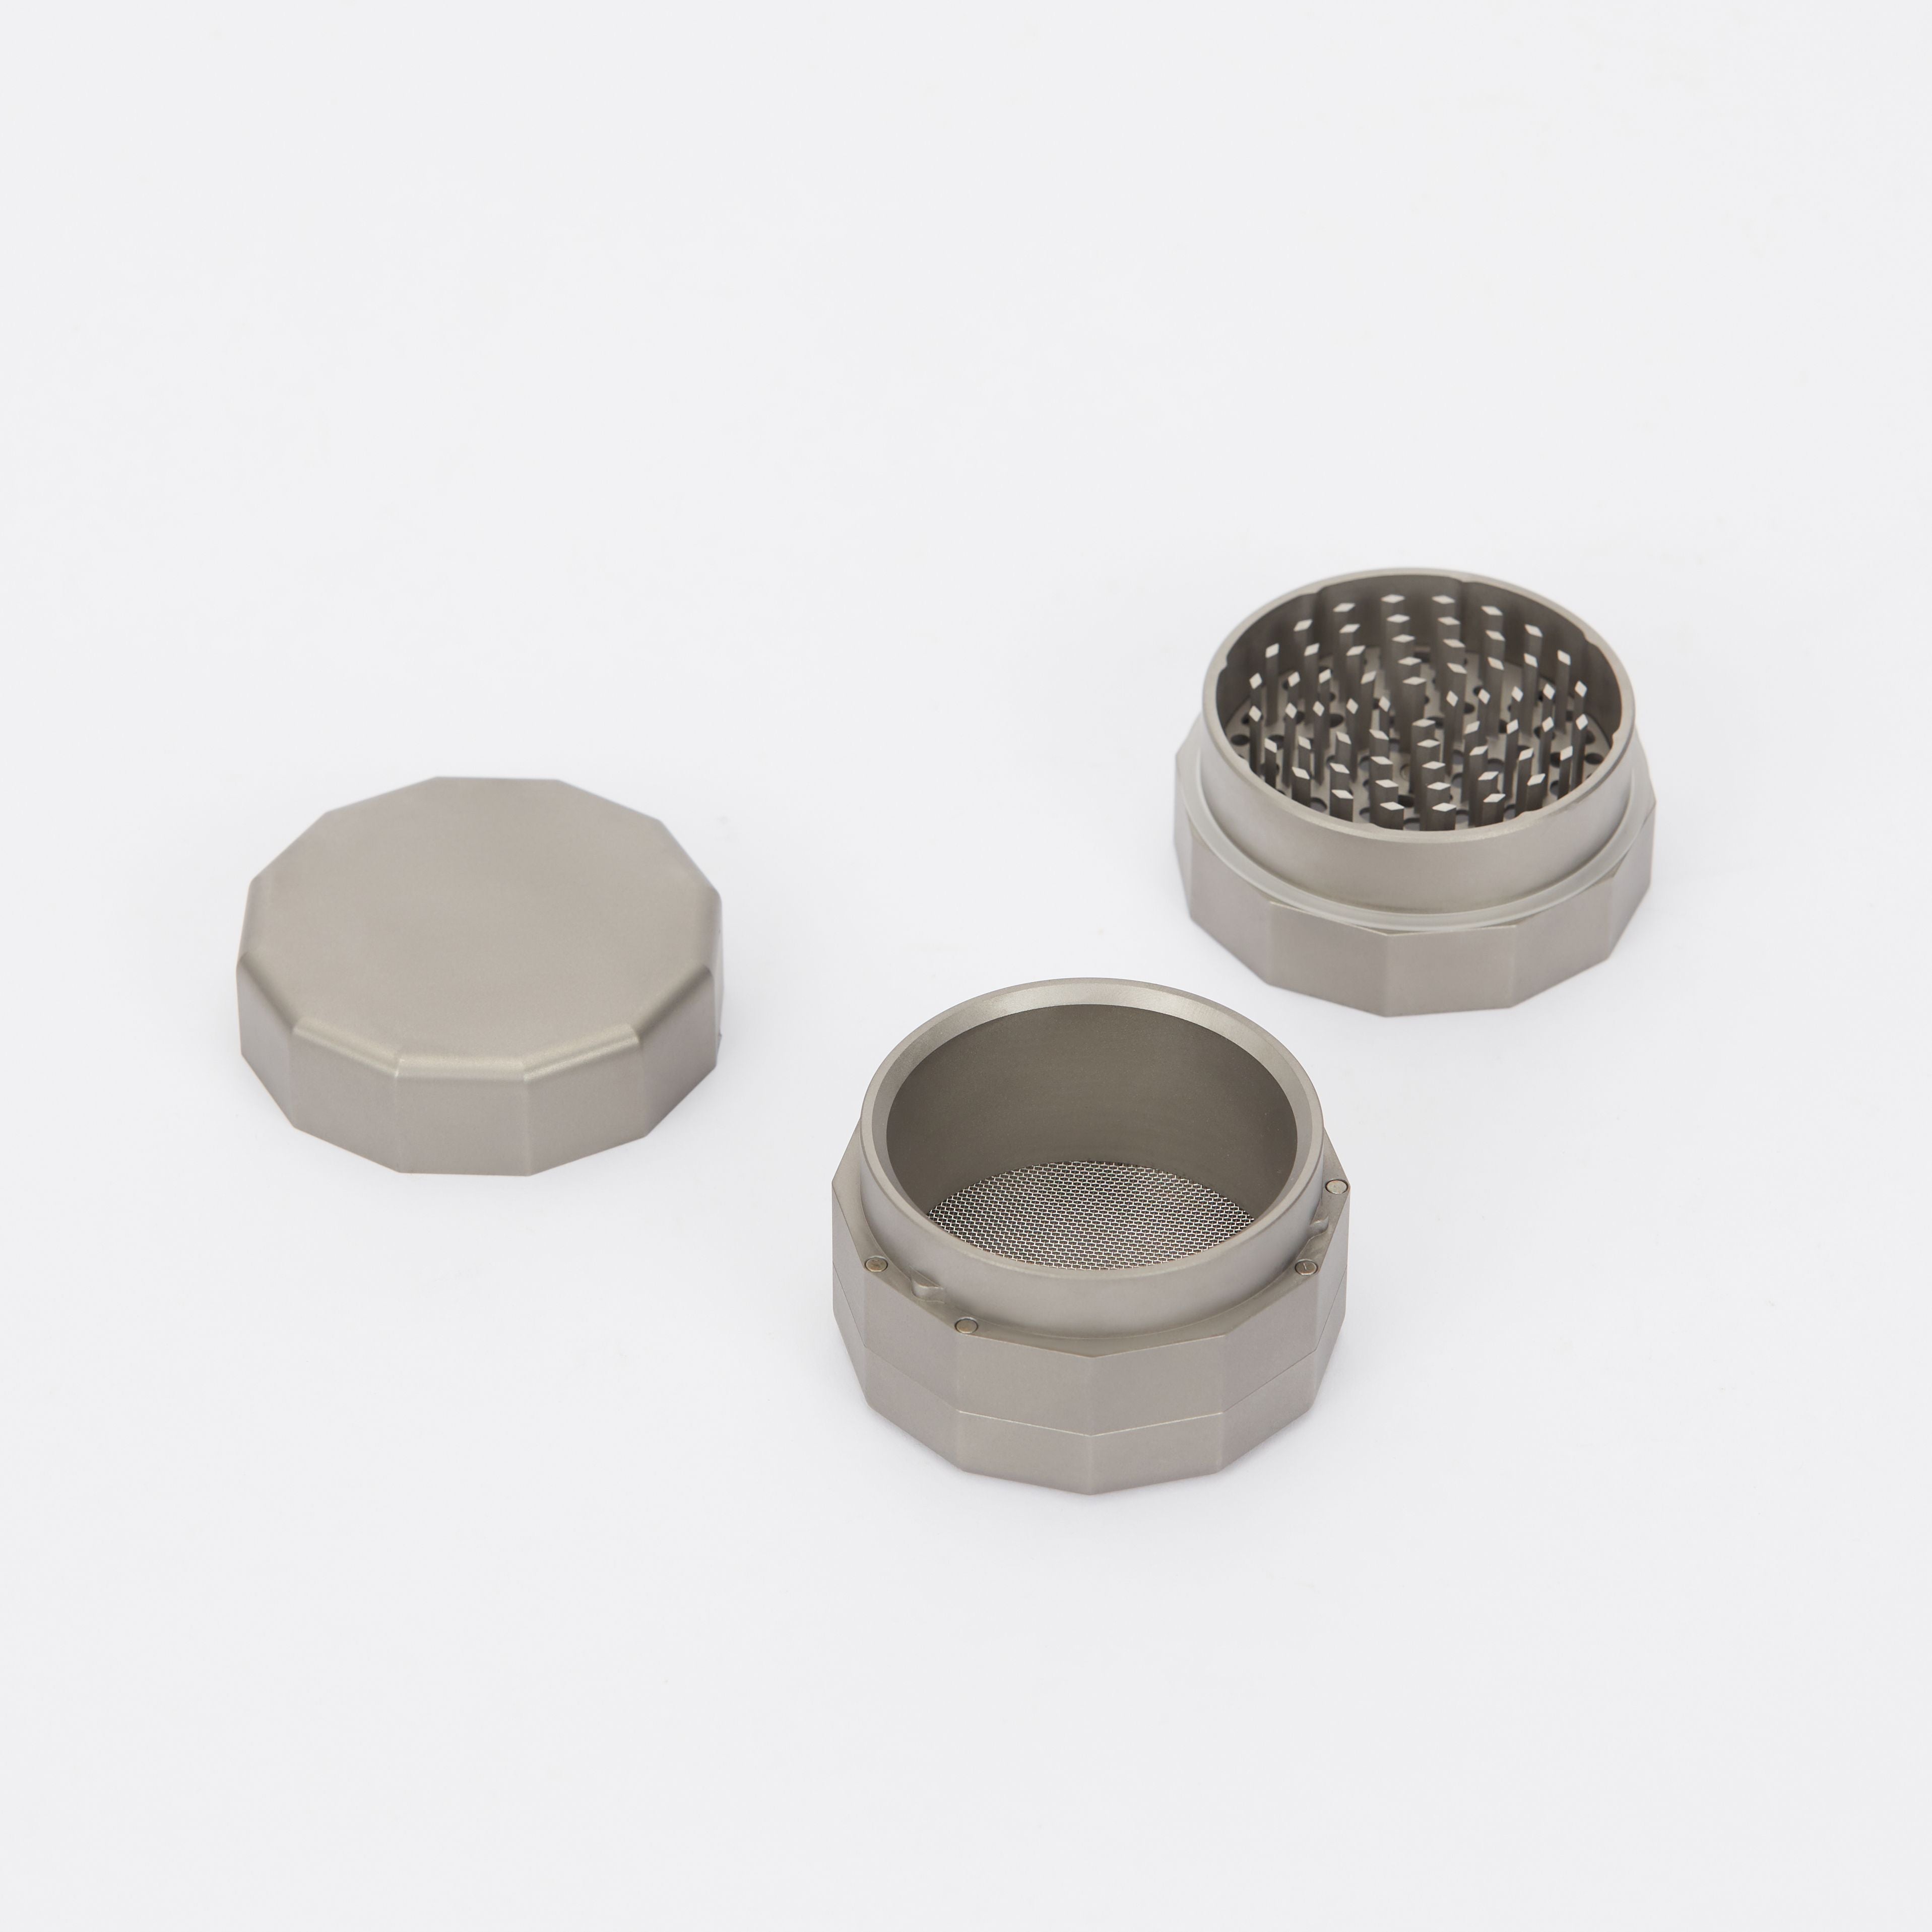 A Premium Tool for Your Elevation The Best Titanium Weed Grinder You Need